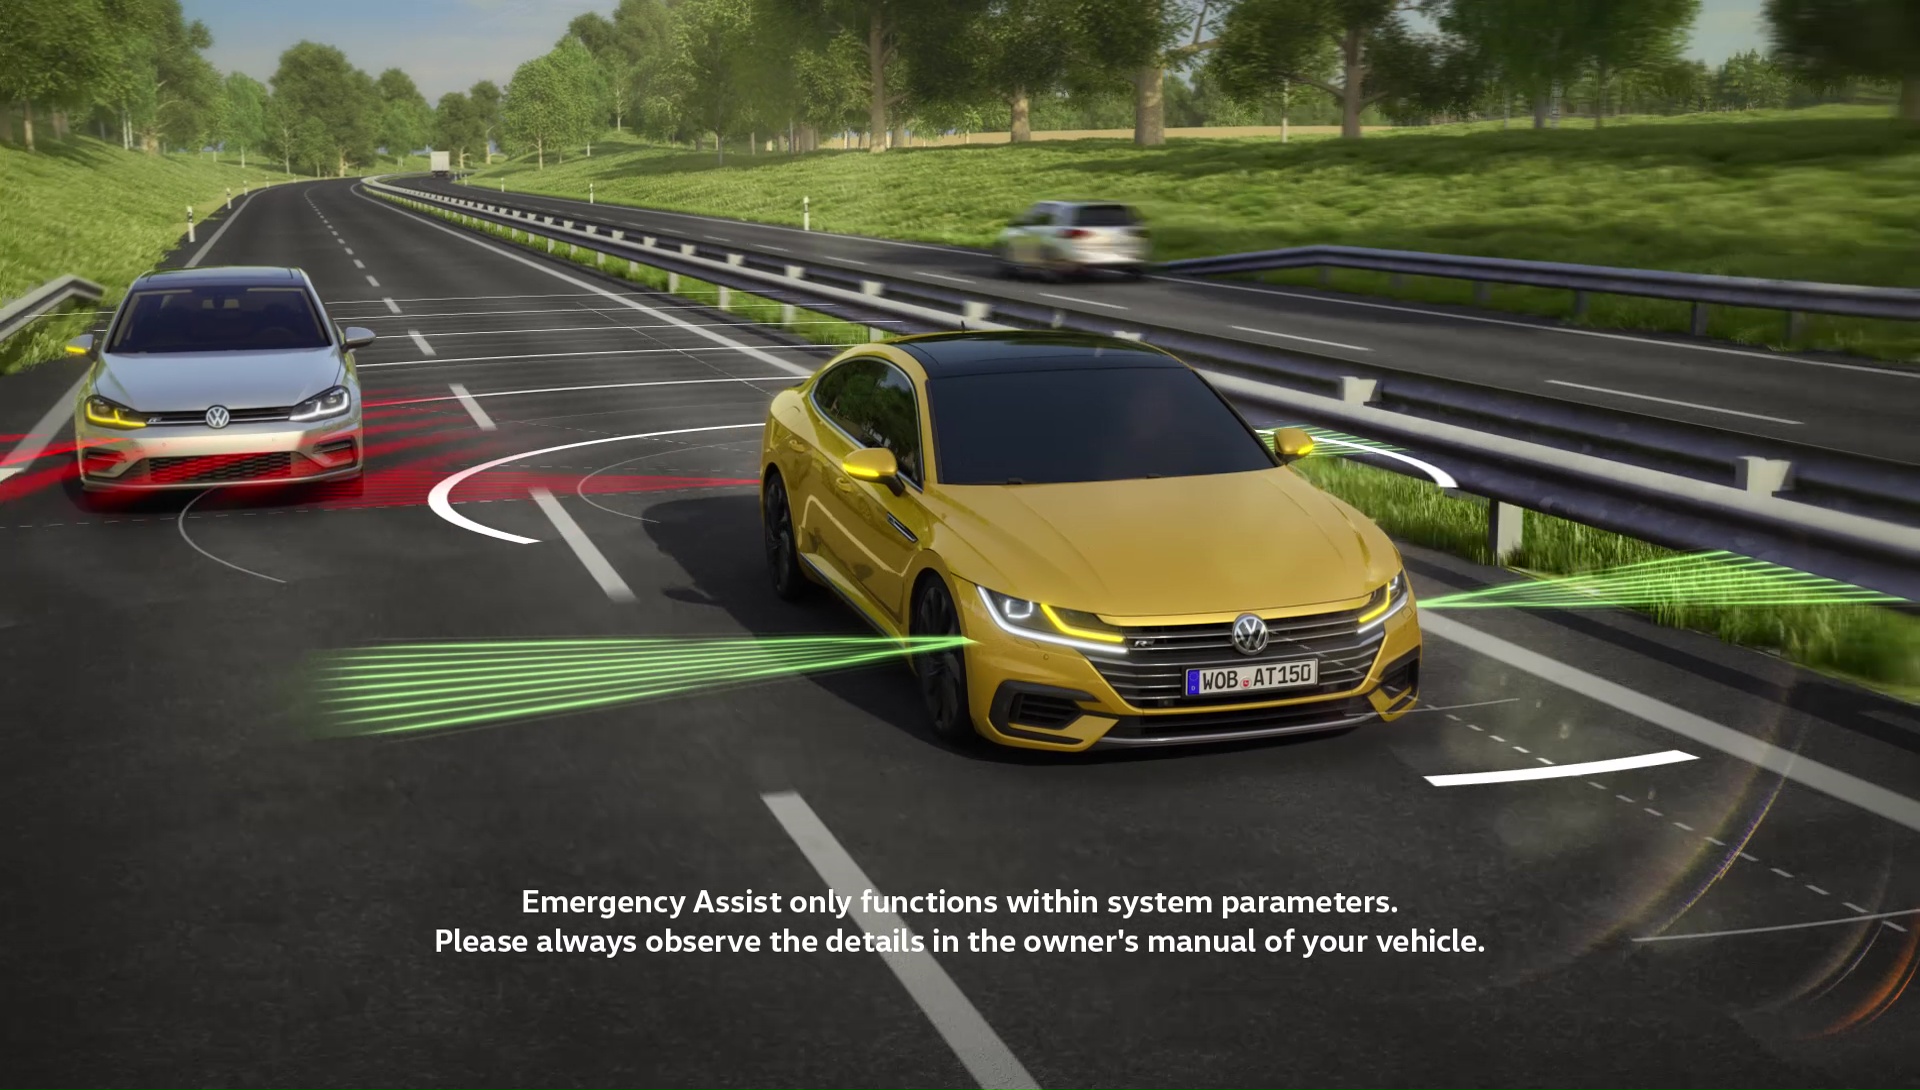 The assistance systems of the Volkswagen Arteon